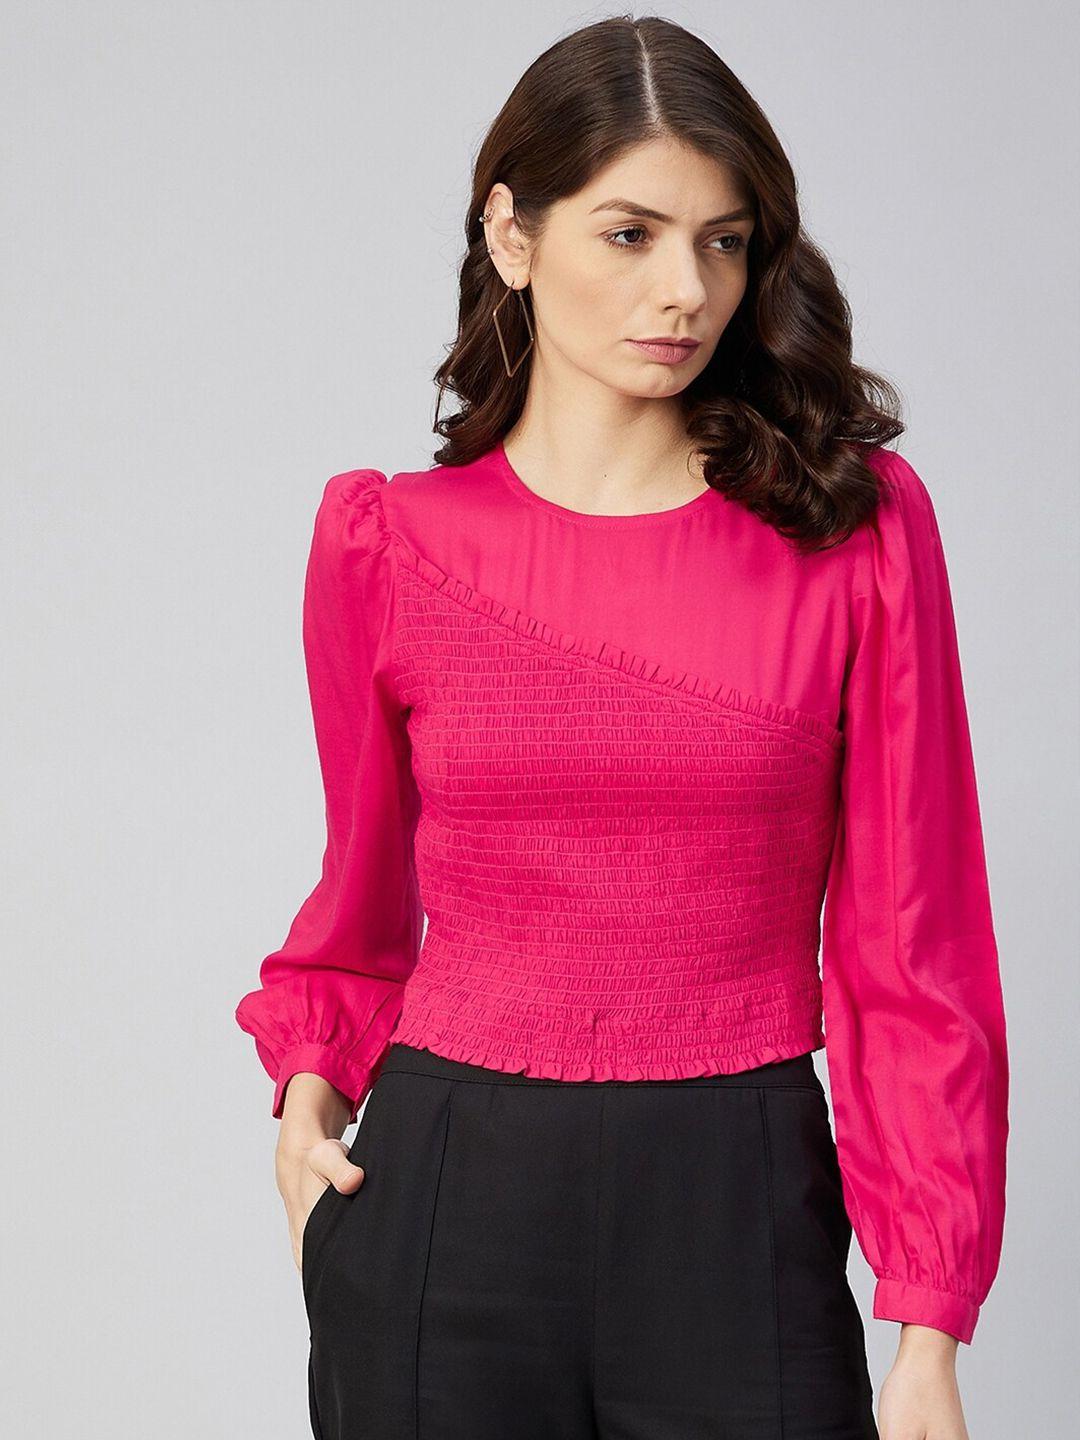 carlton-london-red-solid-top